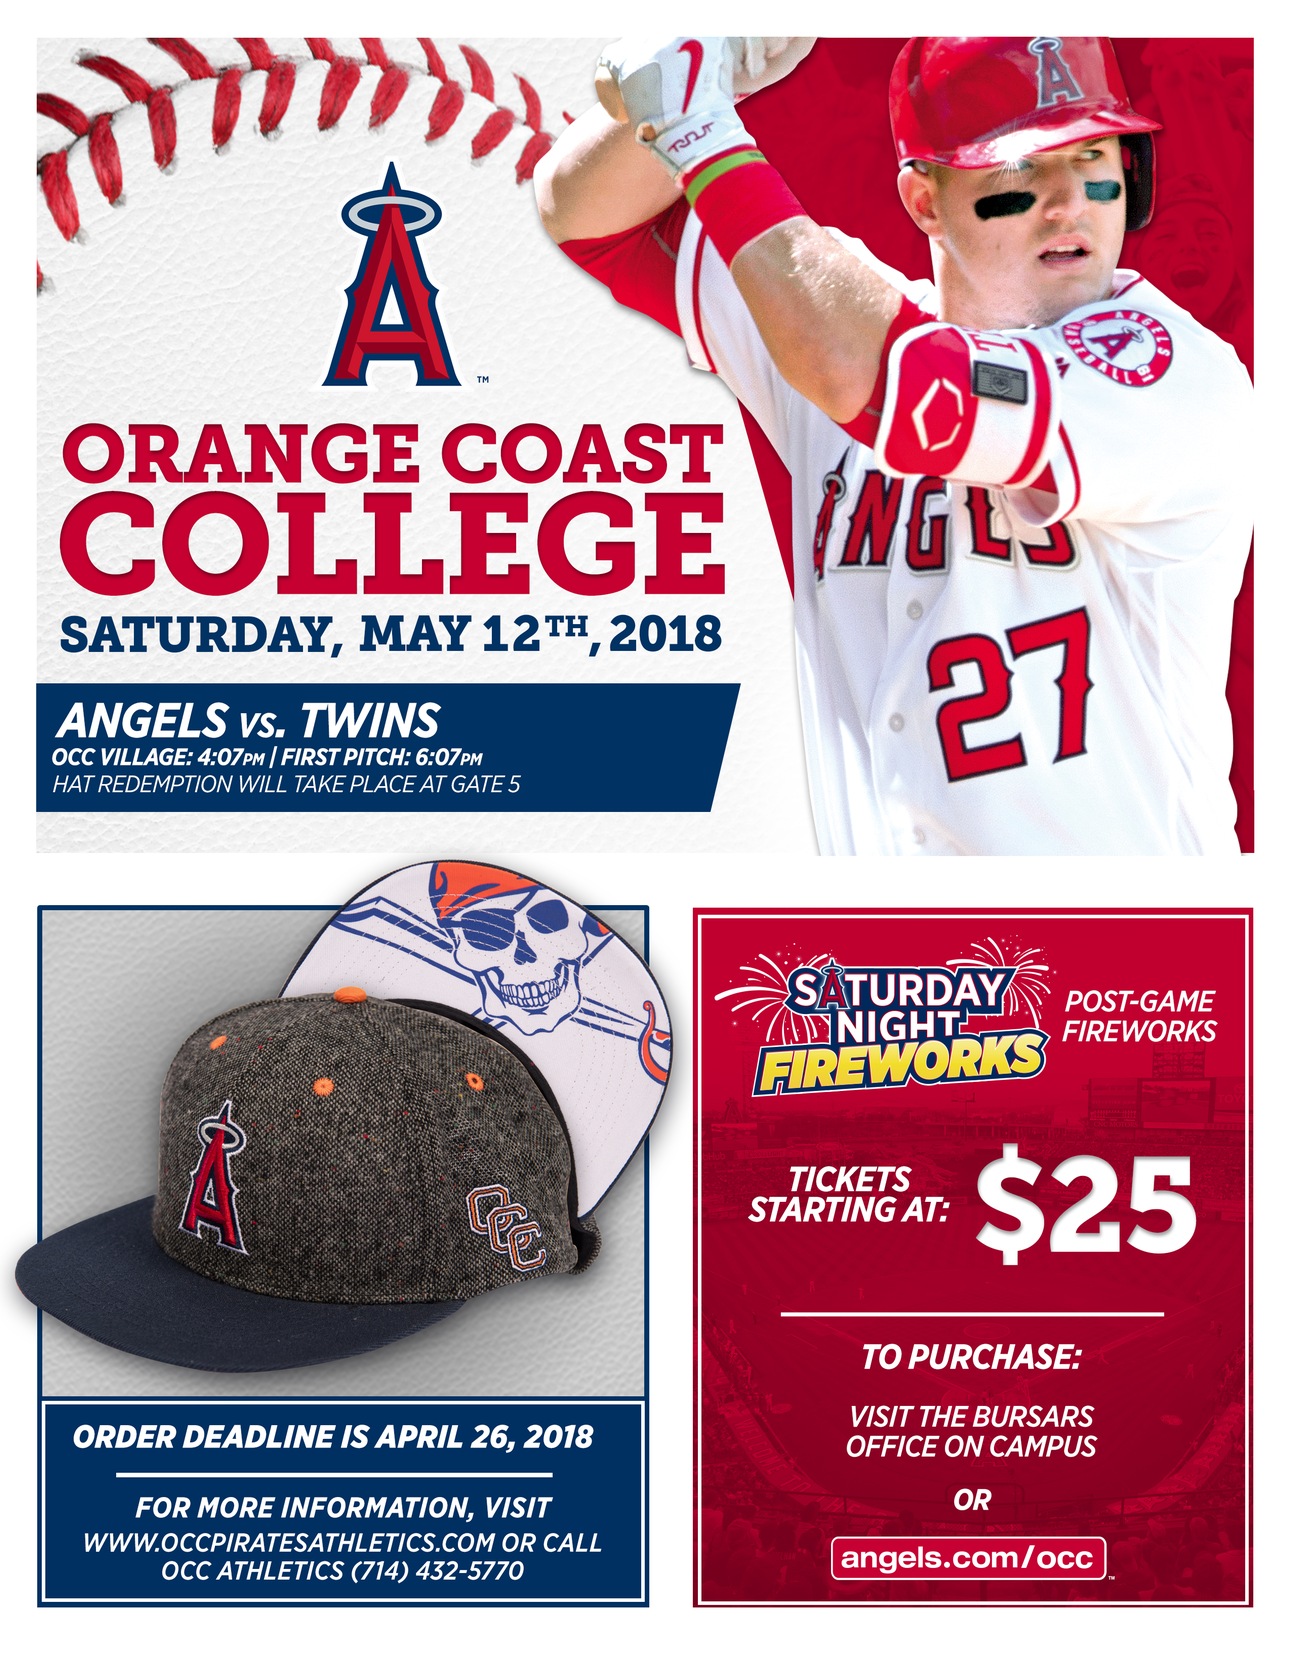 Angels to offer "Orange Coast College Day" on May 12